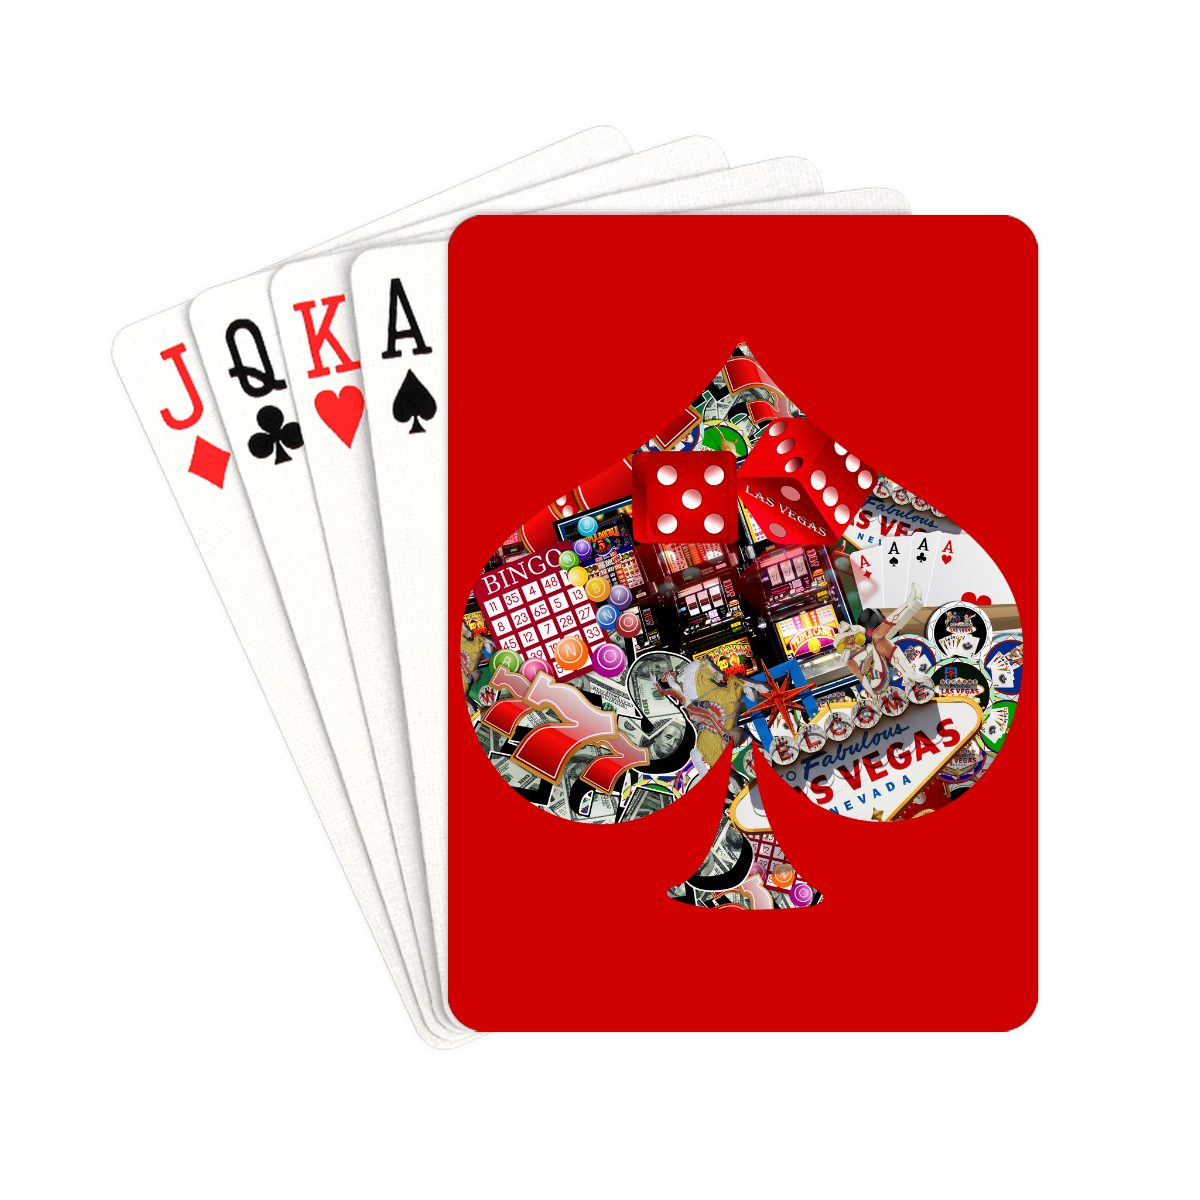 Spade Playing Card Shape - Las Vegas Icons on Red Playing Cards 2.5"x3.5"